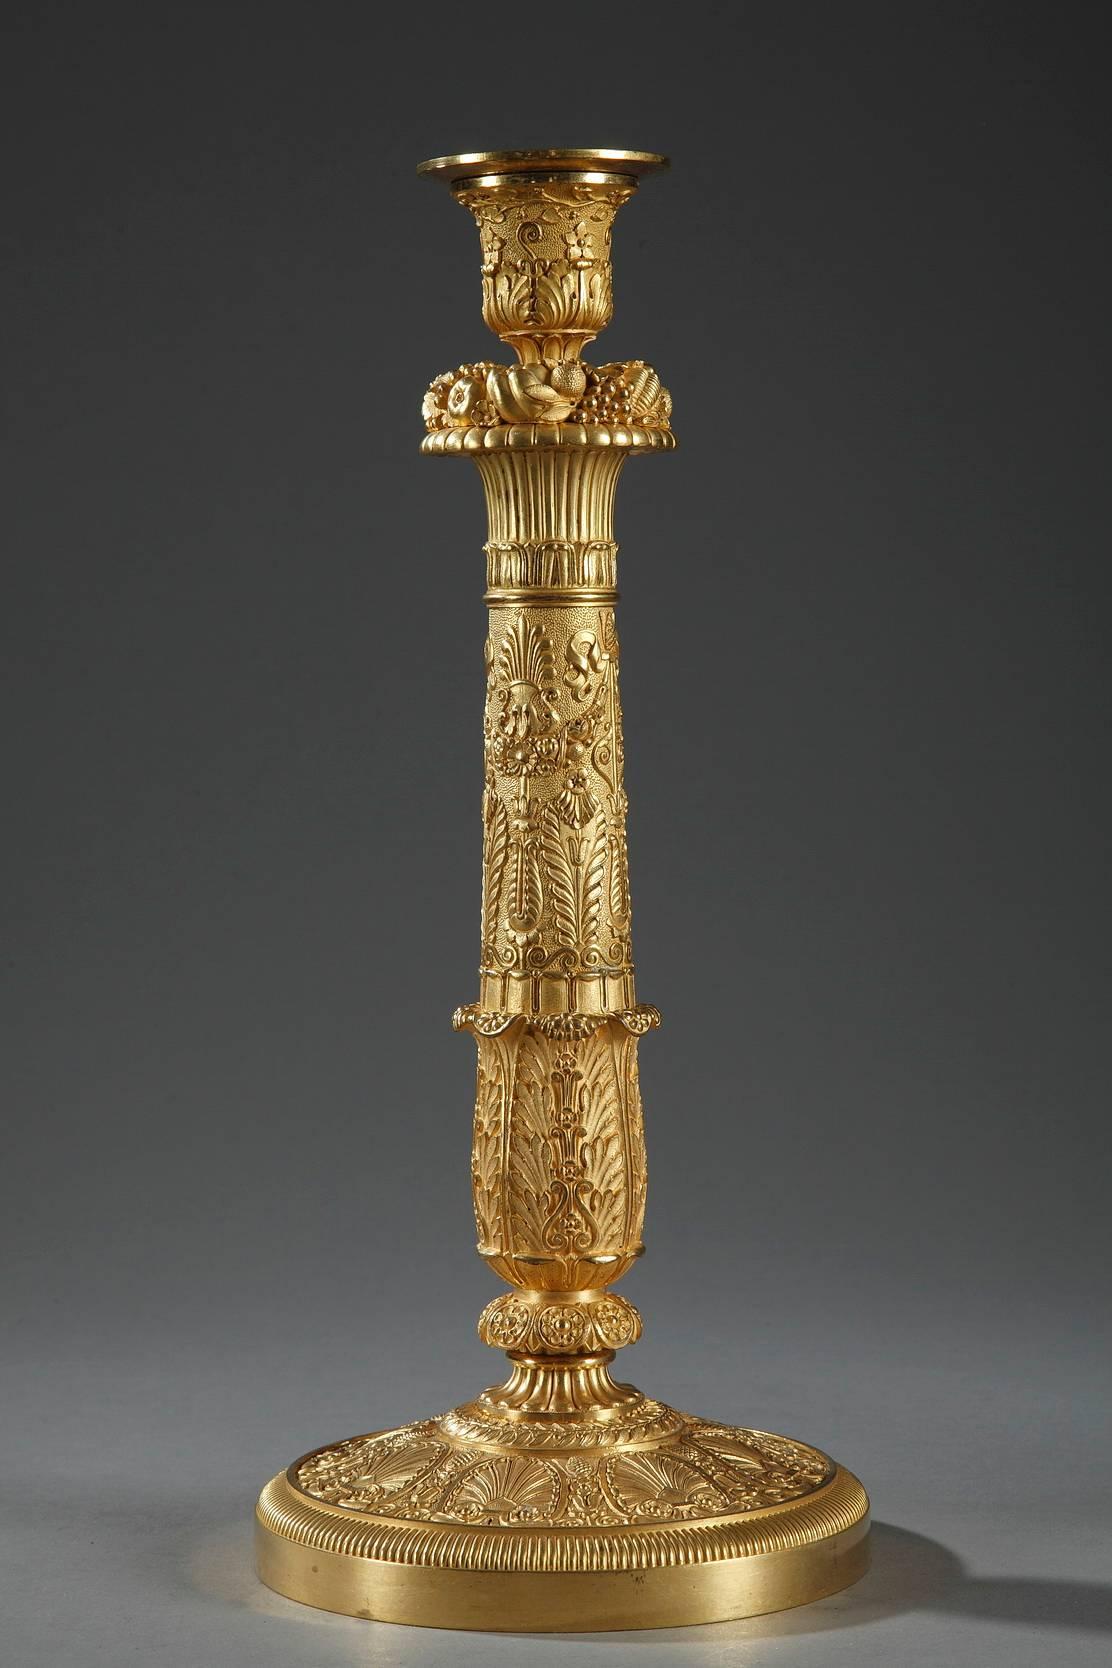 Pair of candlesticks from the Charles X period in gilt and sculpted bronze. They are richly ornamented in palmettes, ivy, and small flowers on a matte background. The barrels are topped with a ring of flowers. Each candlestick rests on a circular